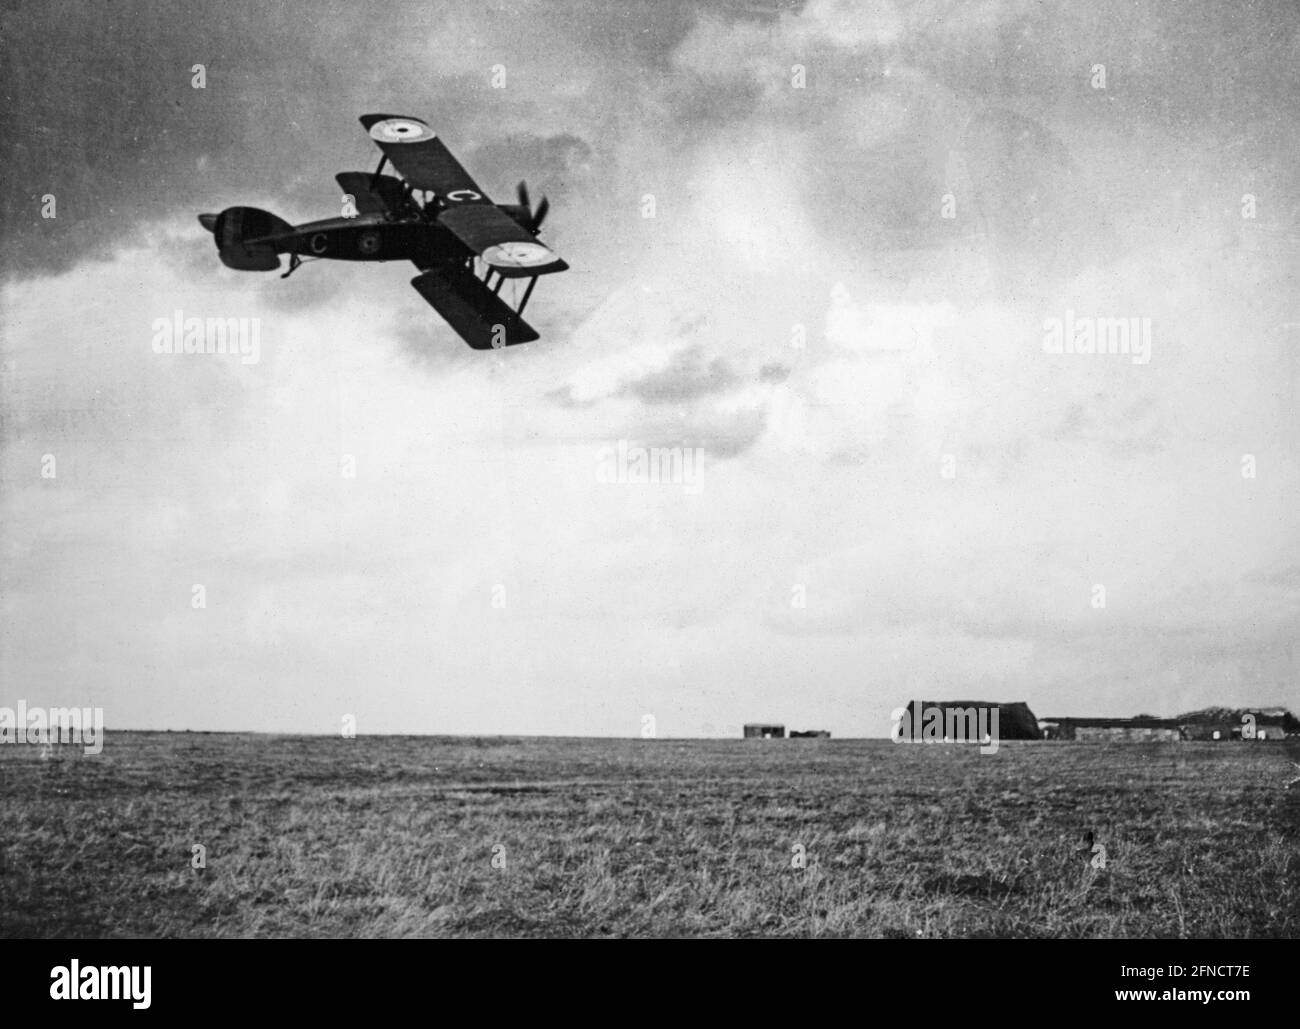 A vintage First World War black and white photograph showing a British Royal Flying Corps Bristol F2B fighter flying low towards an aerodrome. Stock Photo